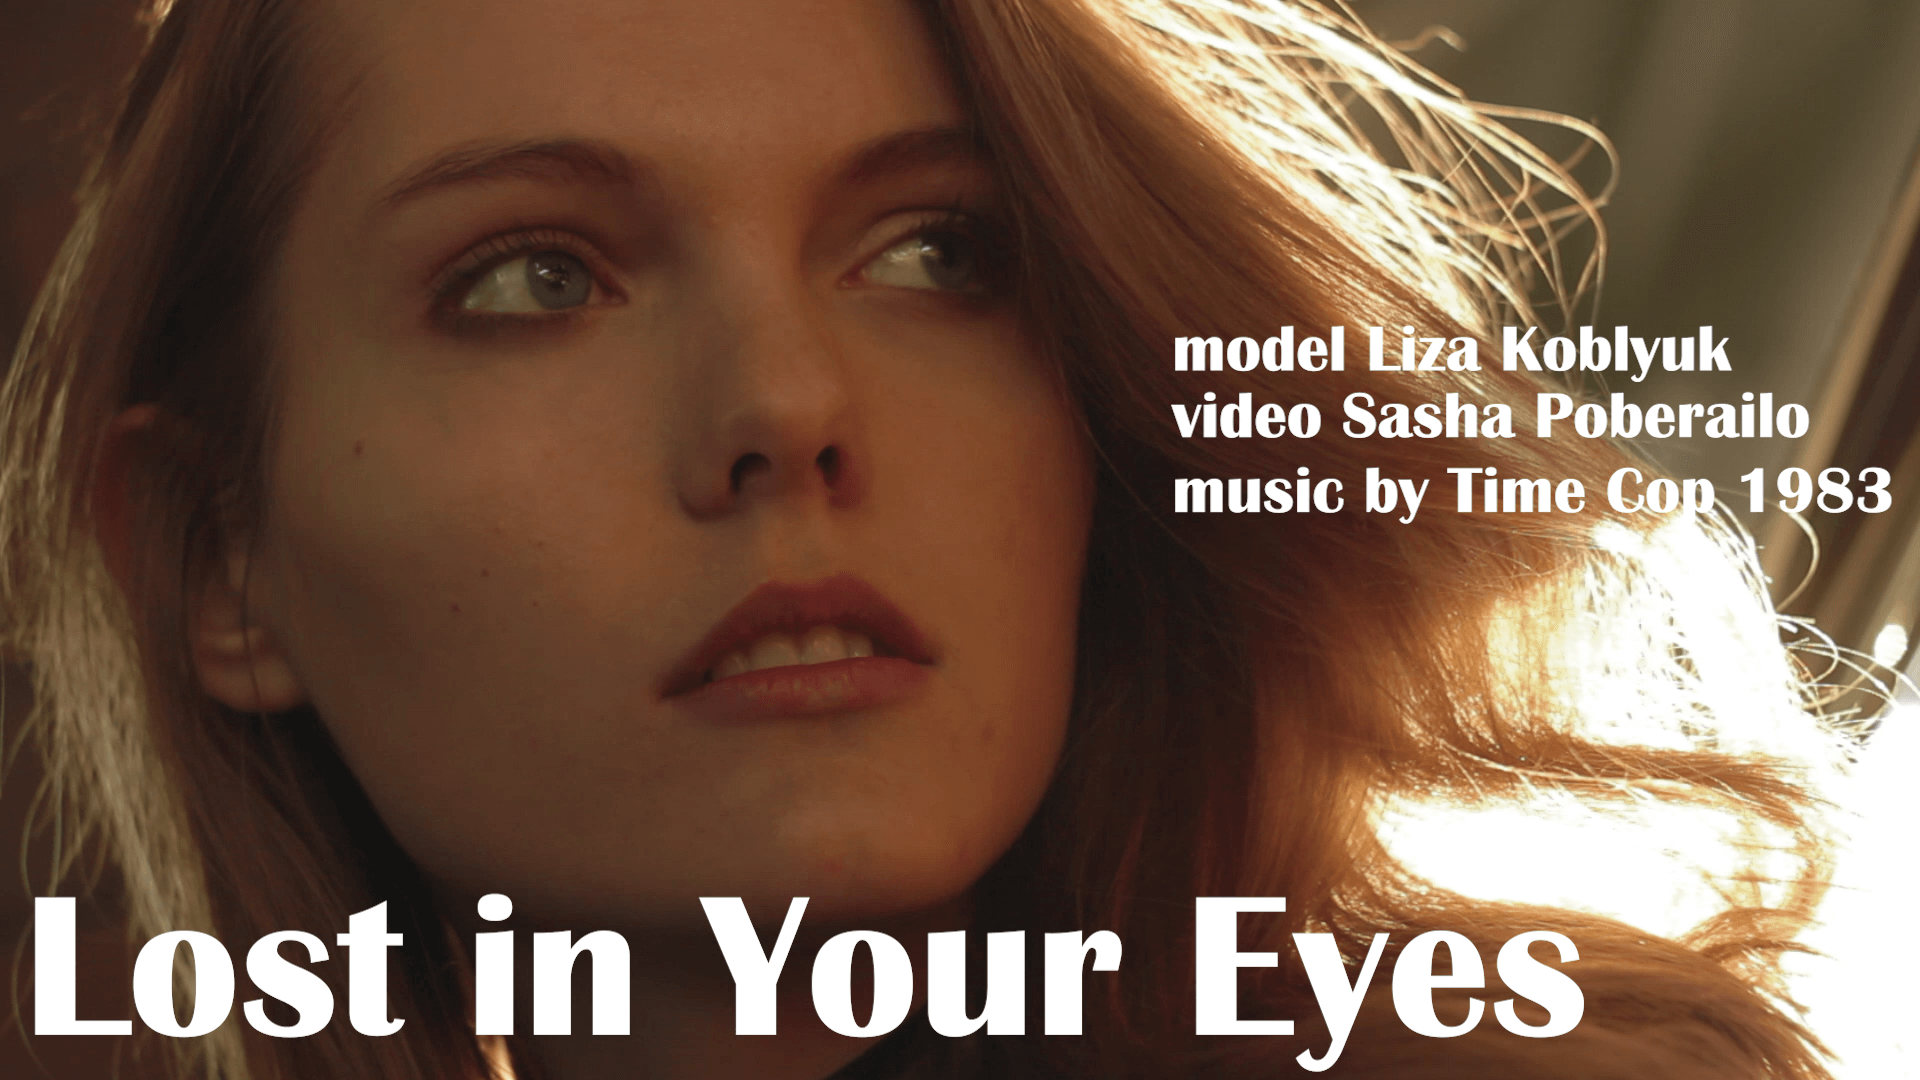 lost in your eyes - model